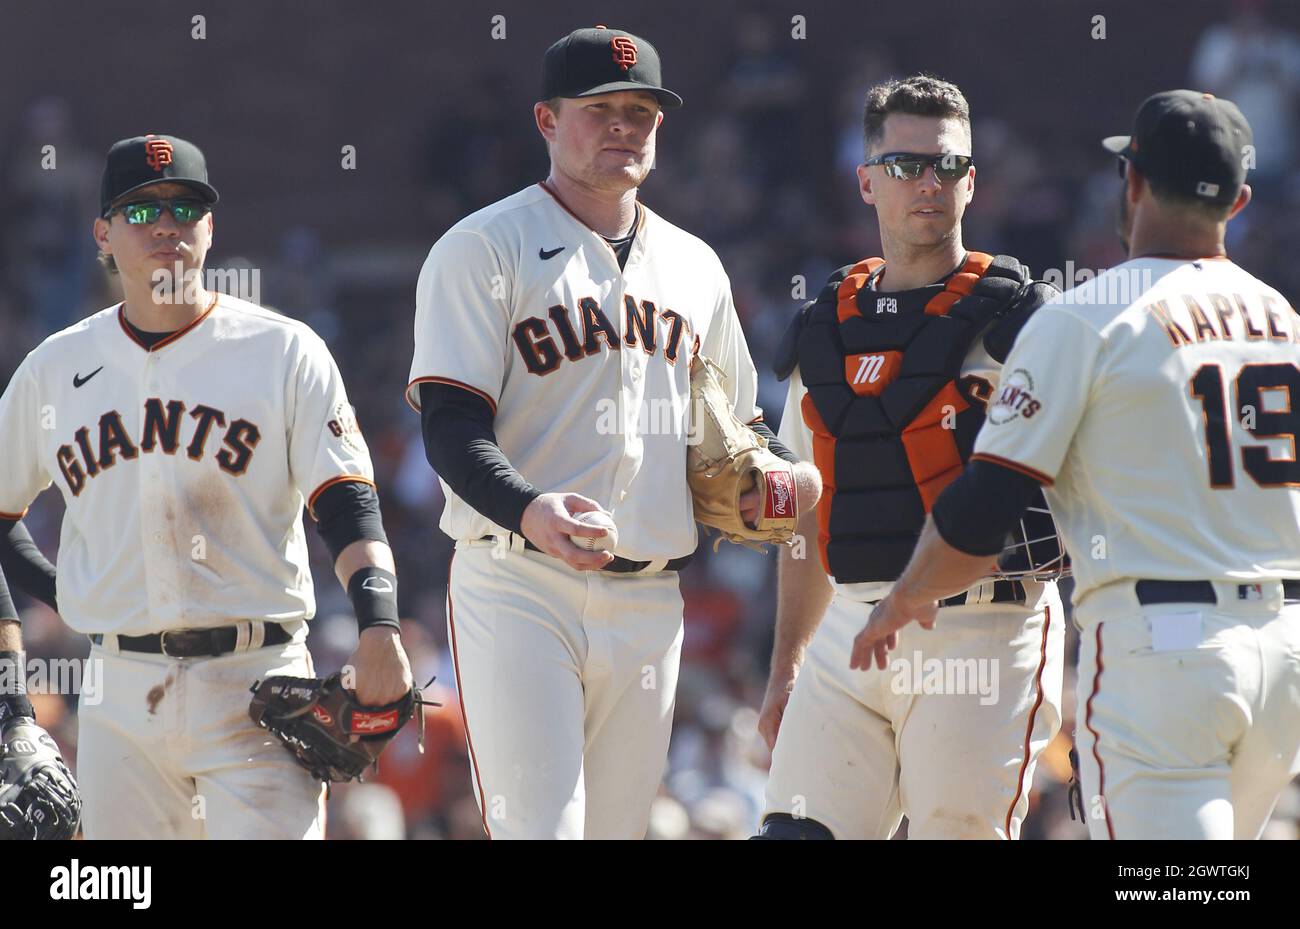 San Francisco, United States. 03rd Oct, 2021. San Francisco Giants pitcher Logan Webb, second from left, leaves the game in the eighth inning during play against the San Diego Padres at Oracle Park on Sunday, October 3, 2021 in San Francisco. From left, are Wilmer Flores, Logan Webb, Buster Posey manager Gabe Kaplan. The Giants clinched the Western Division of the National league with today's win. Photo by George Nikitin/UPI Credit: UPI/Alamy Live News Stock Photo